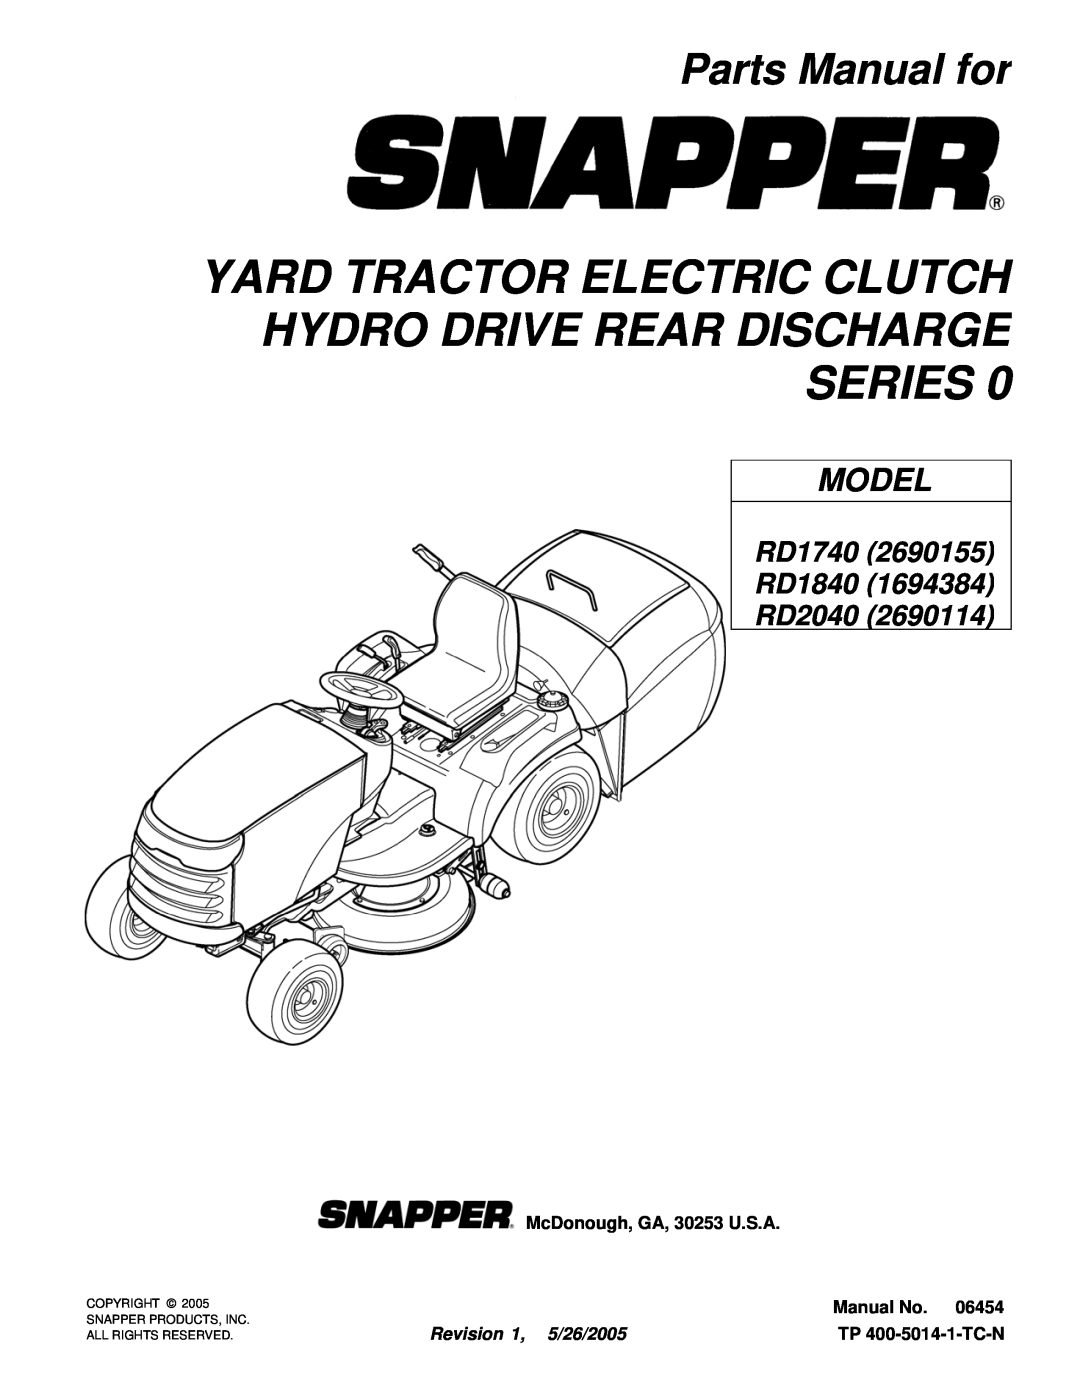 Snapper RD1740, RD1840, RD2040 manual Yard Tractor Electric Clutch Hydro Drive Rear Discharge Series, Parts Manual for 